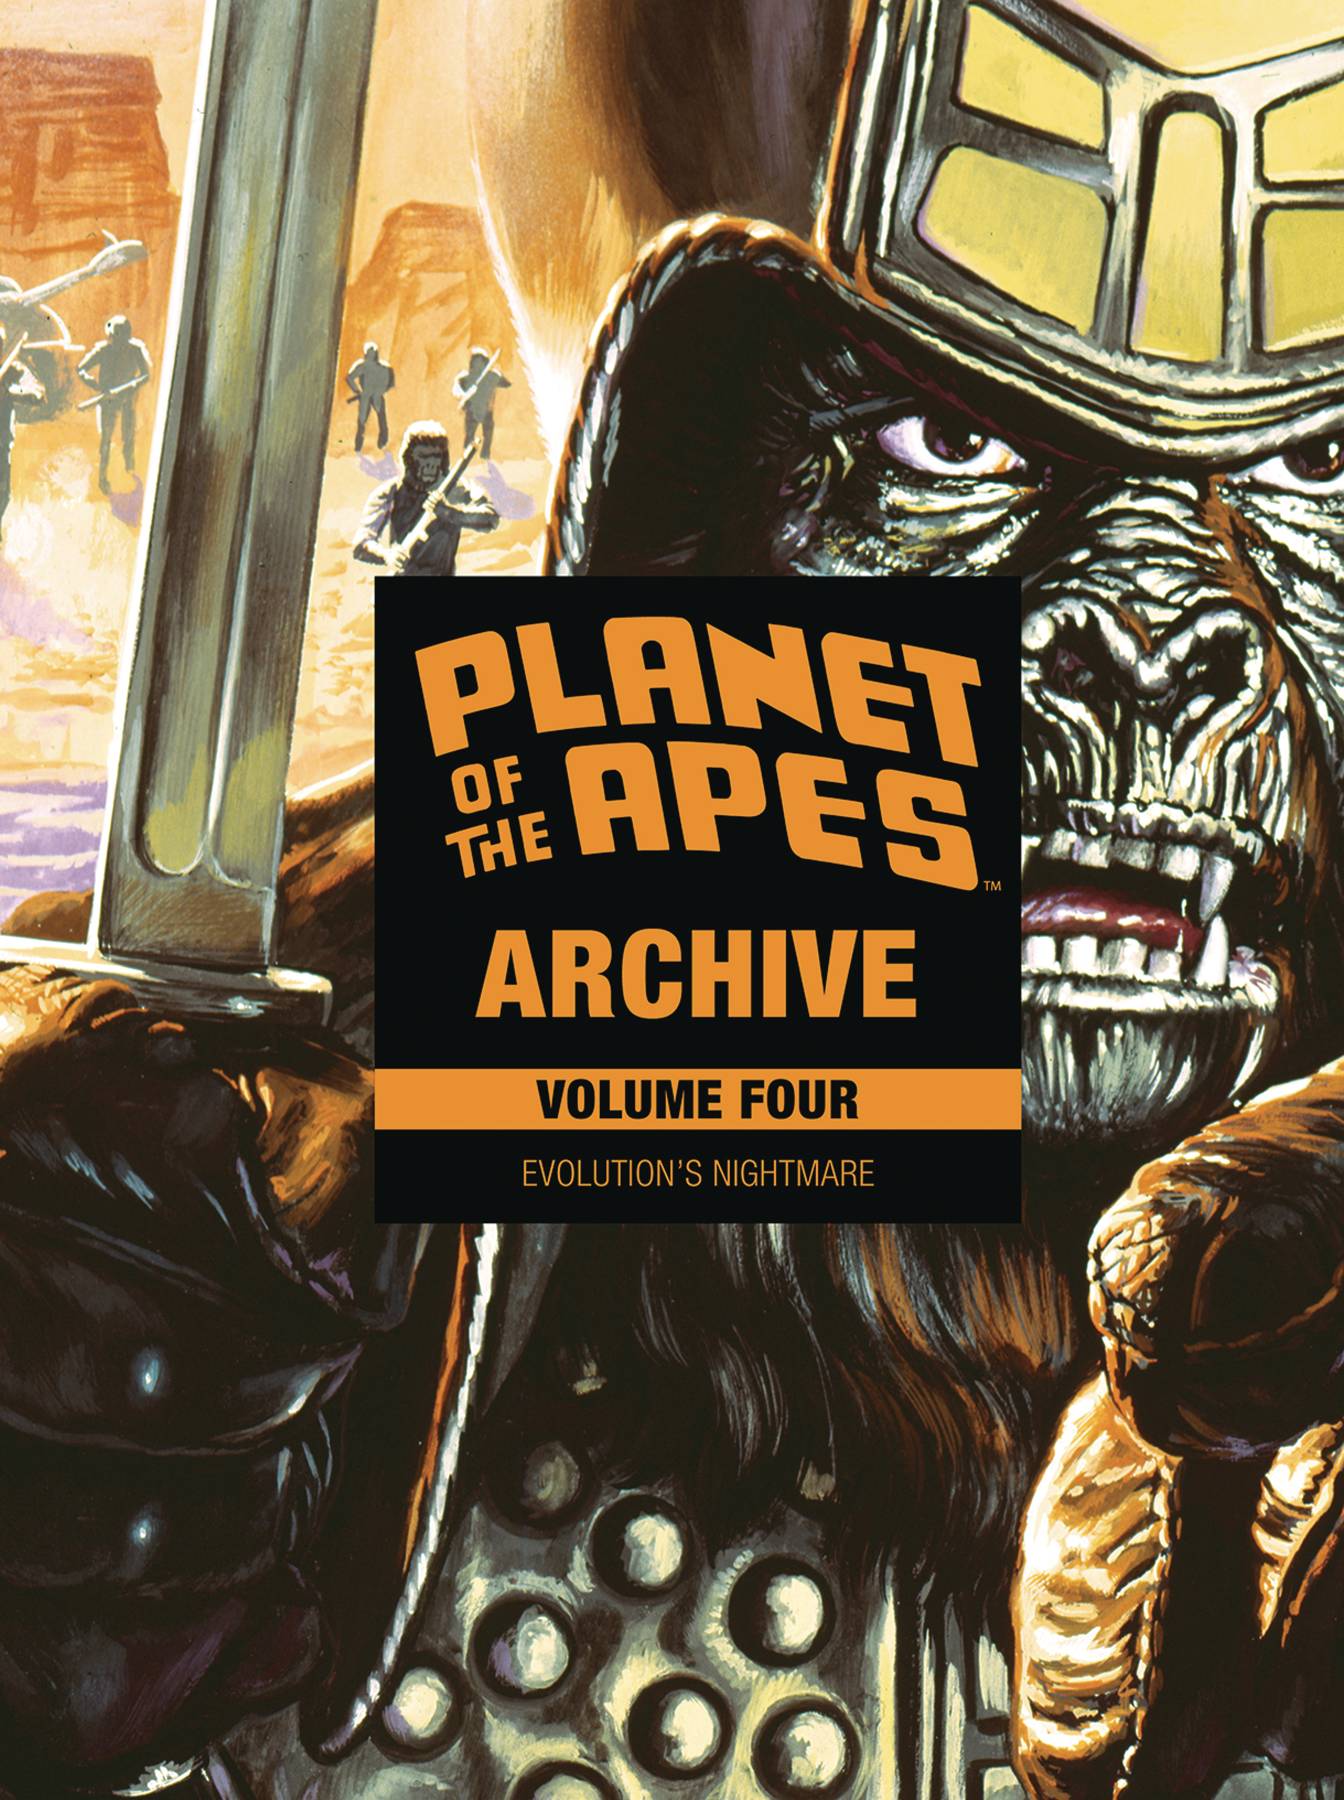 Planet of Apes Archive Hardcover Volume 4